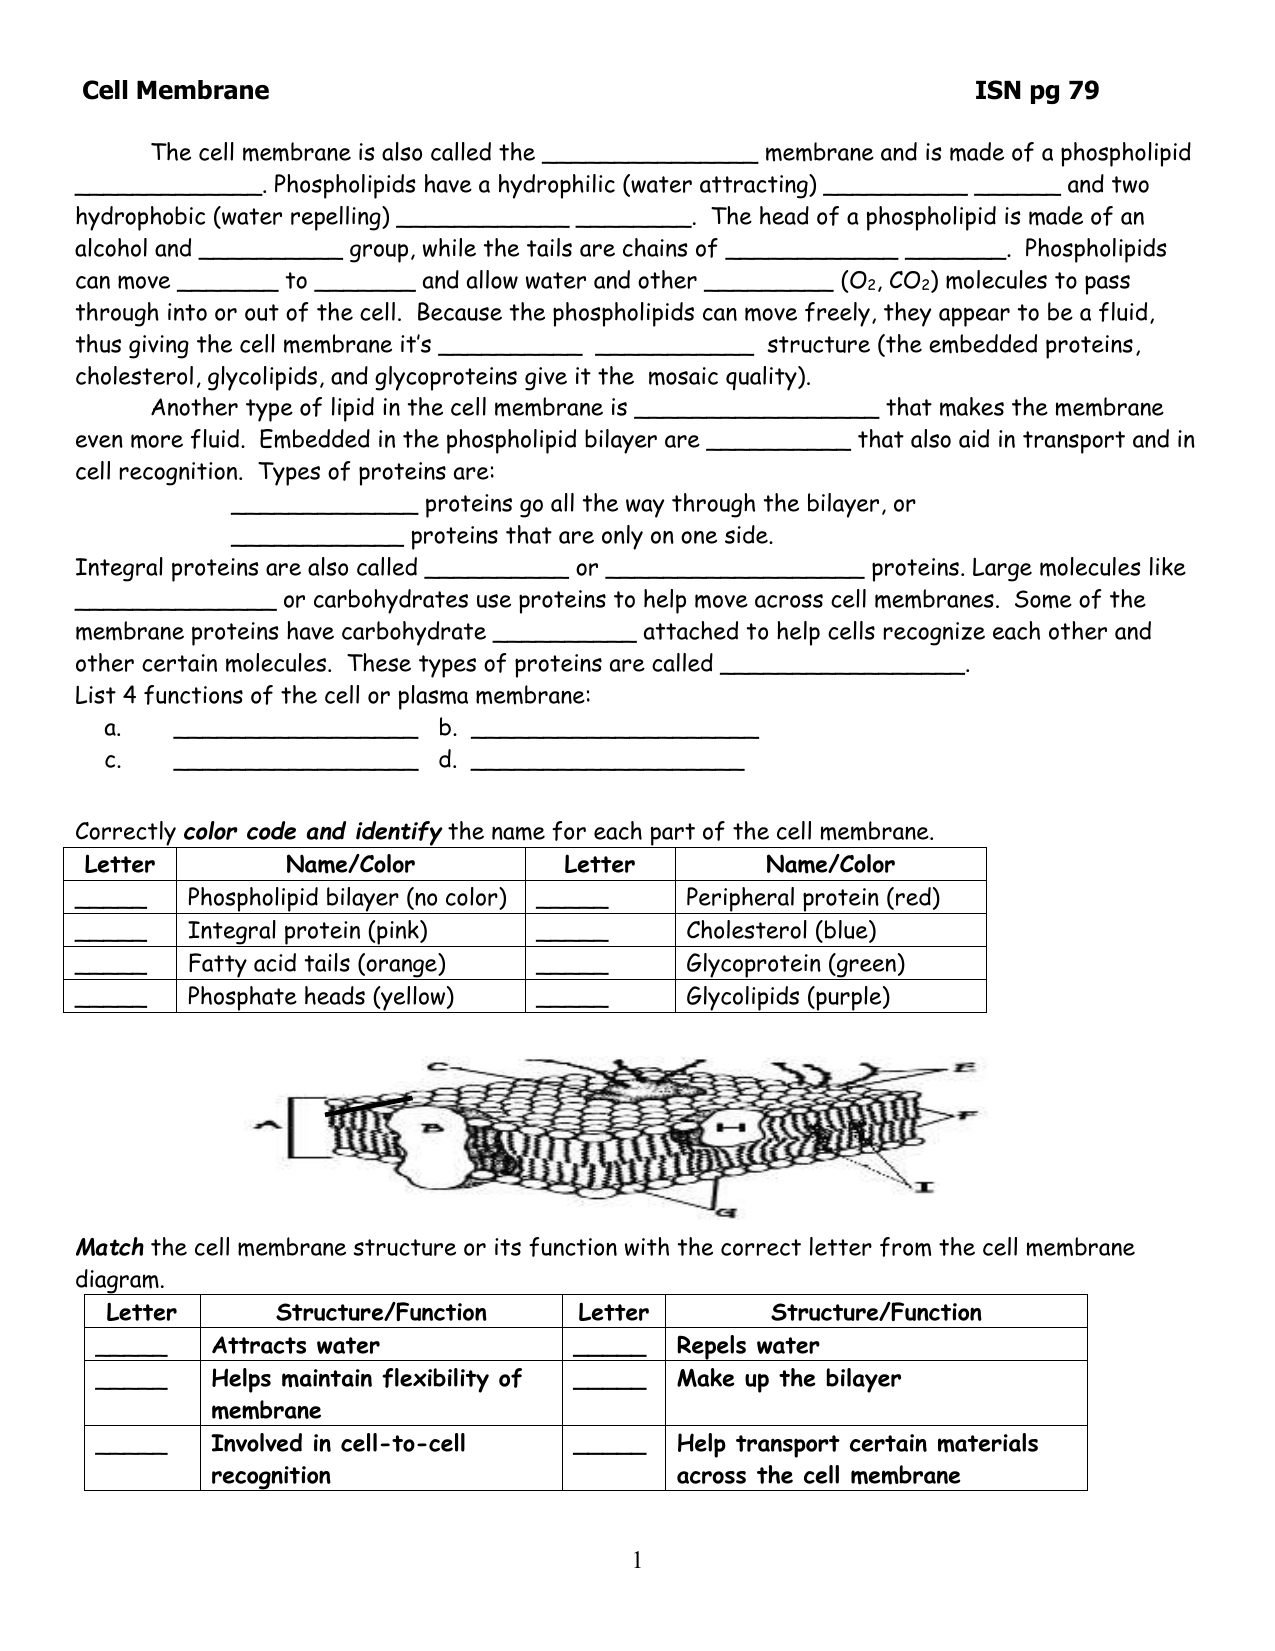 Cell Membrane ISN22-22 In Cell Membrane Coloring Worksheet Answers